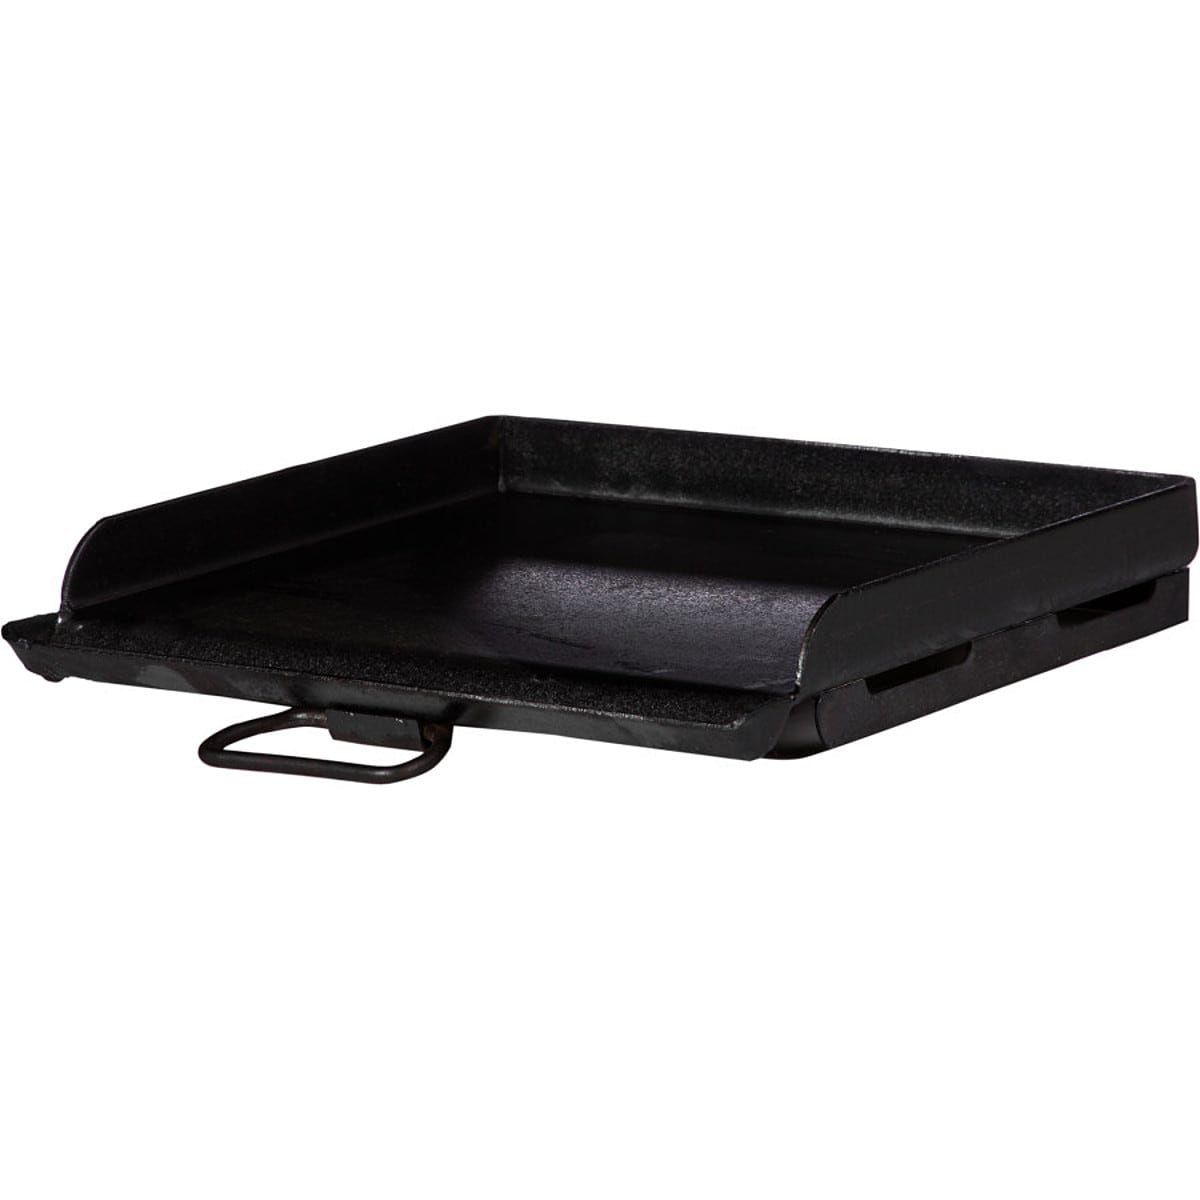 Photos - Other Accessories CAMP Professional 14 1 Burner Griddle 